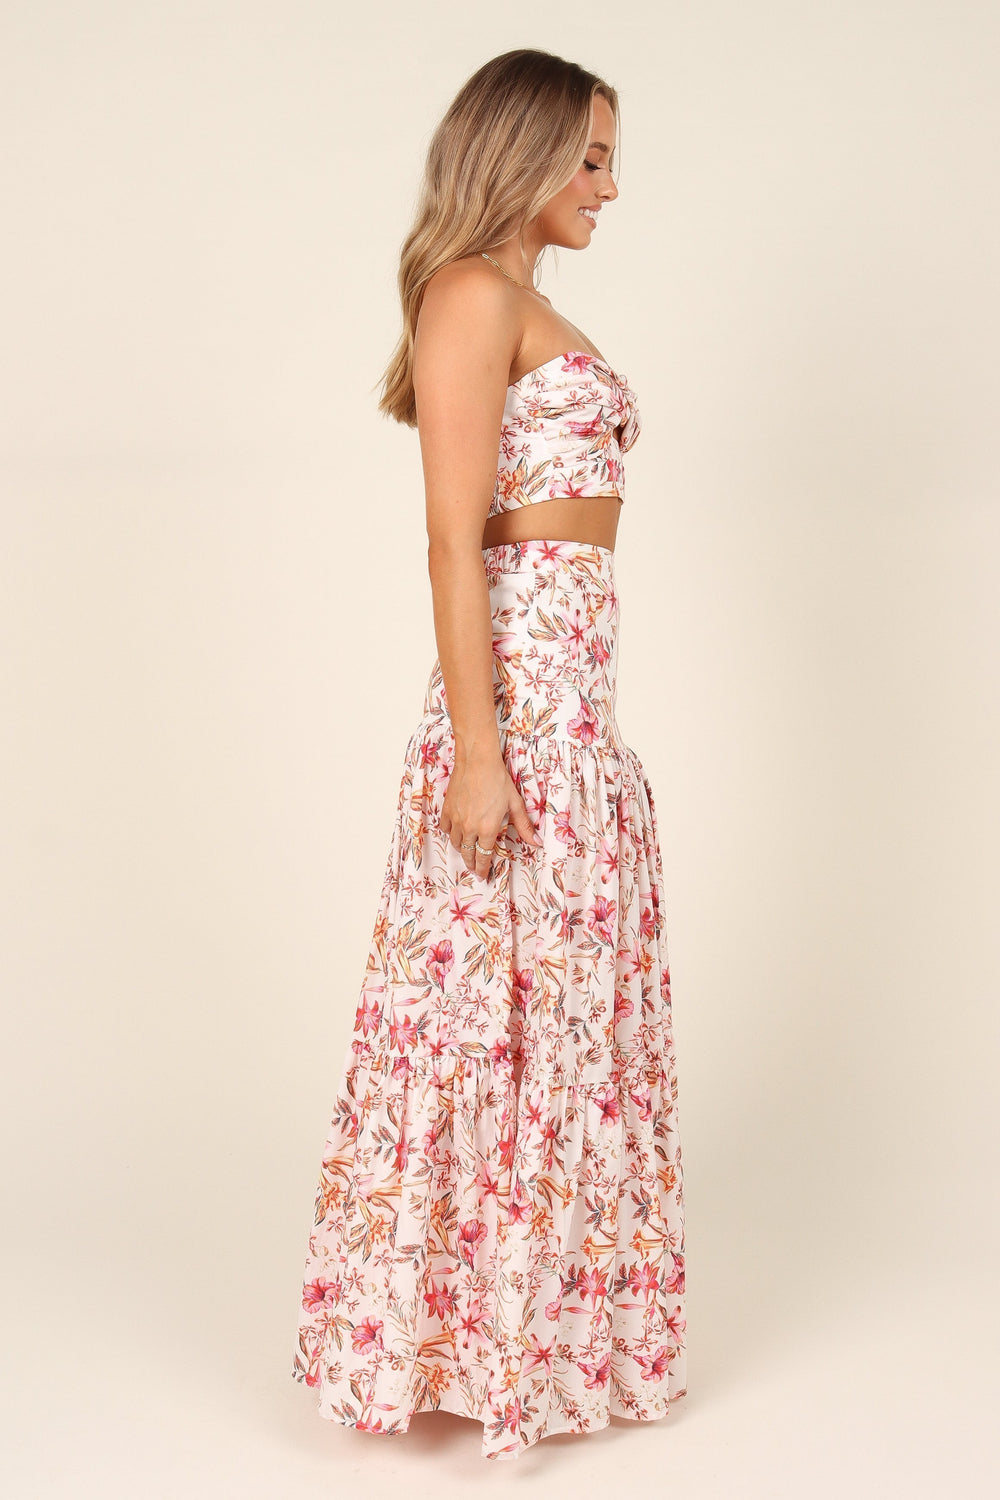 Petal and Pup USA BOTTOMS Hydra Maxi Skirt - White Floral